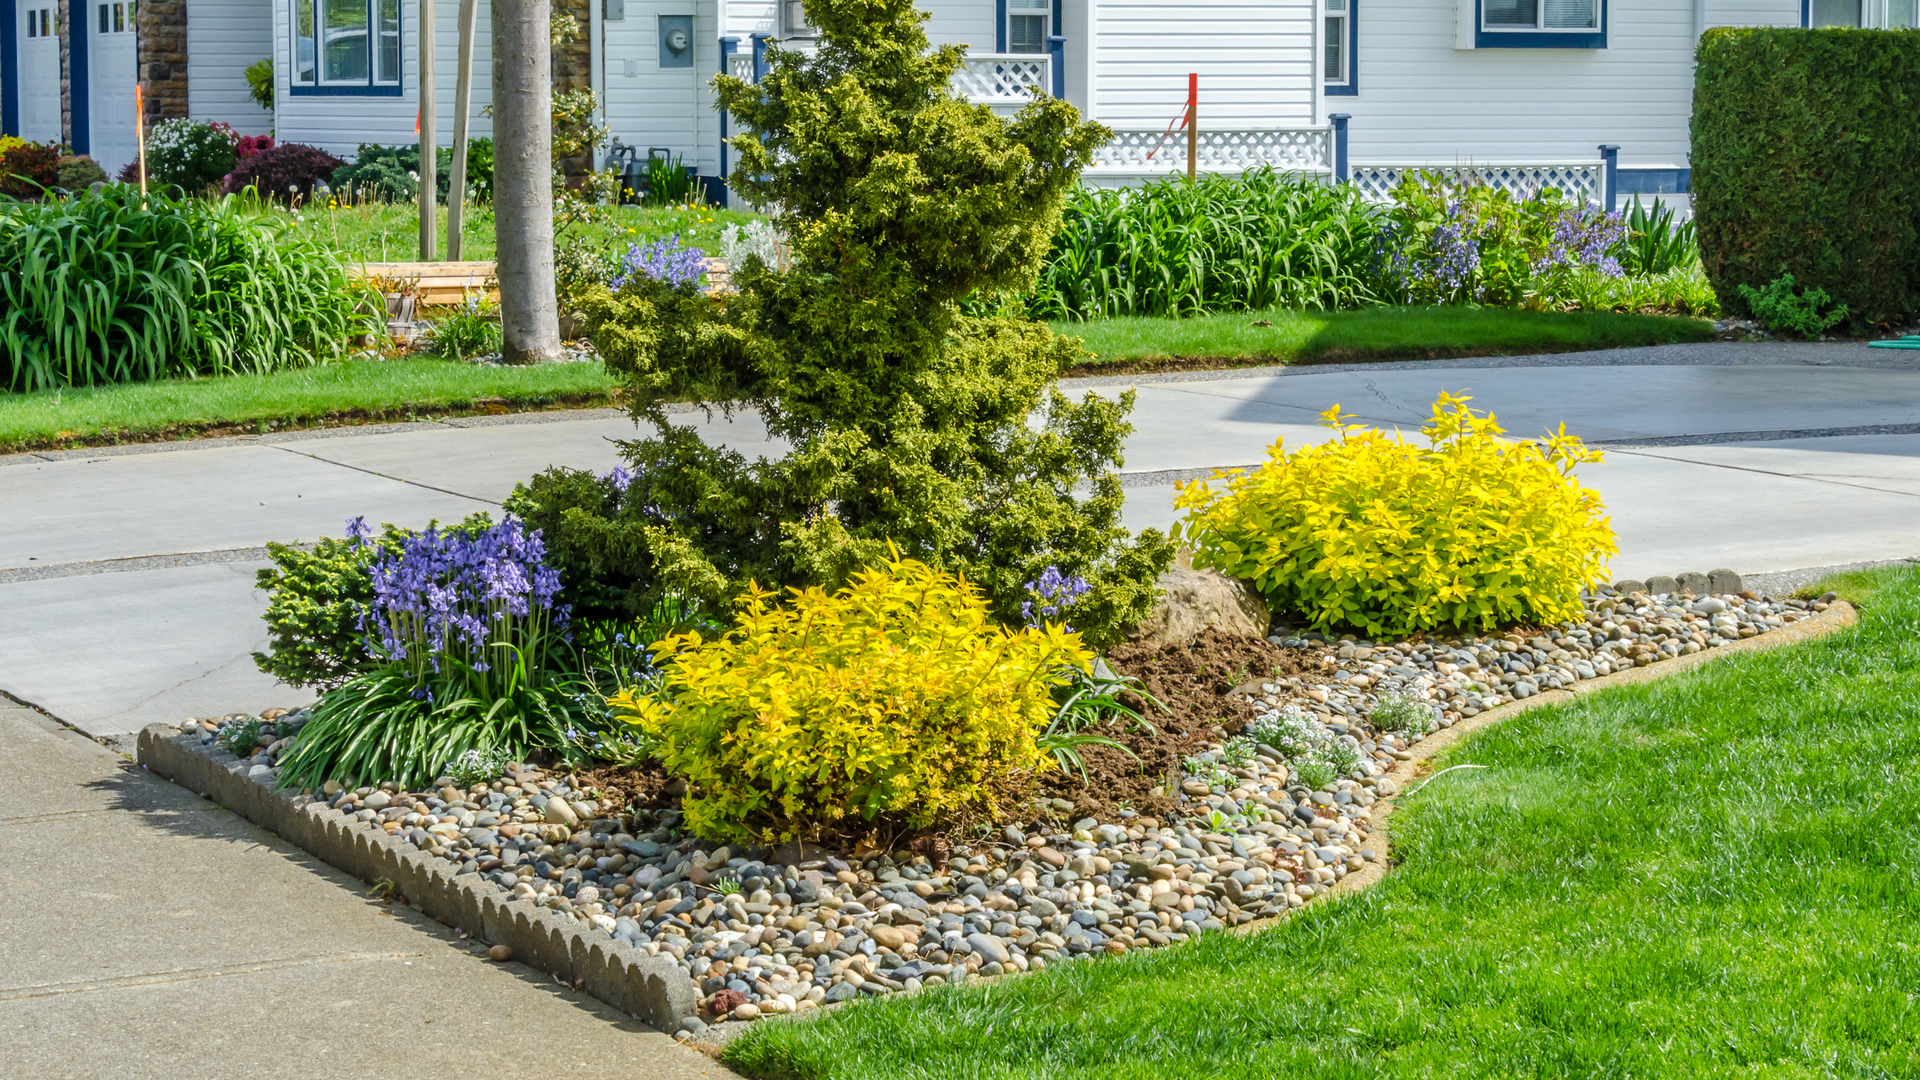 A vibrant, newly installed landscape bed in front of our client's home in Washington, NJ.